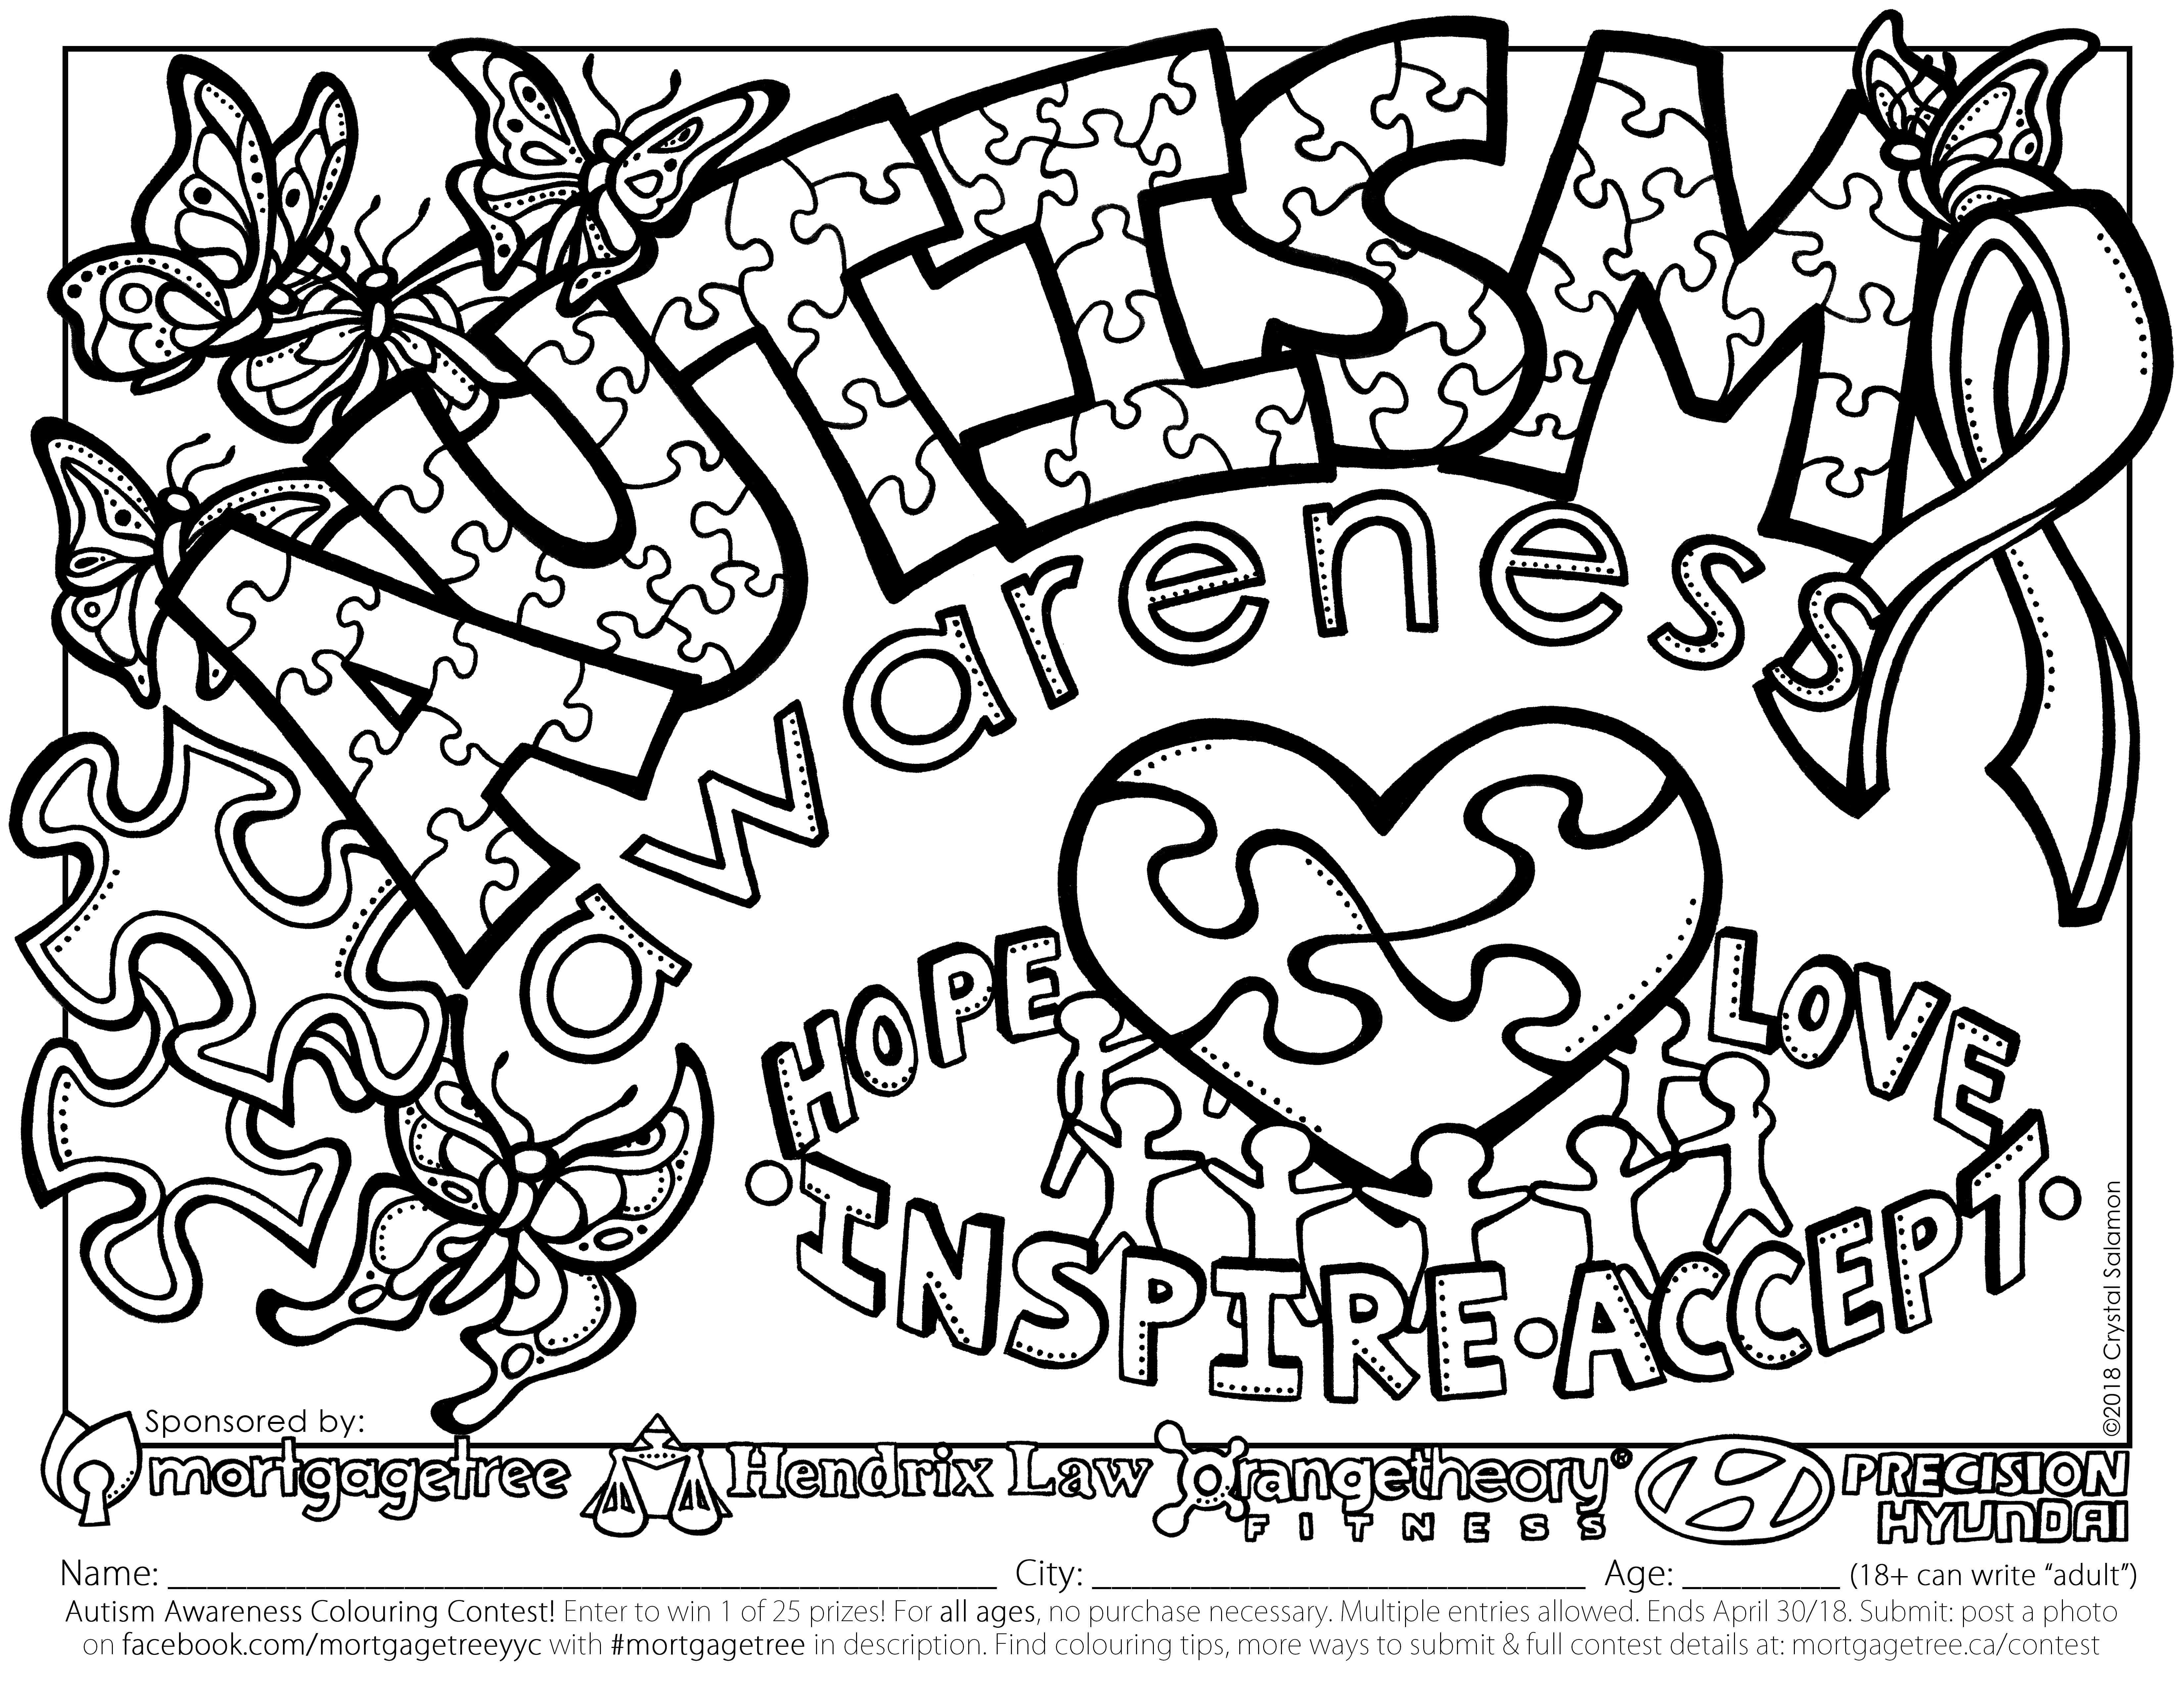 III. The Therapeutic Benefits of Coloring Books for Autistic Individuals